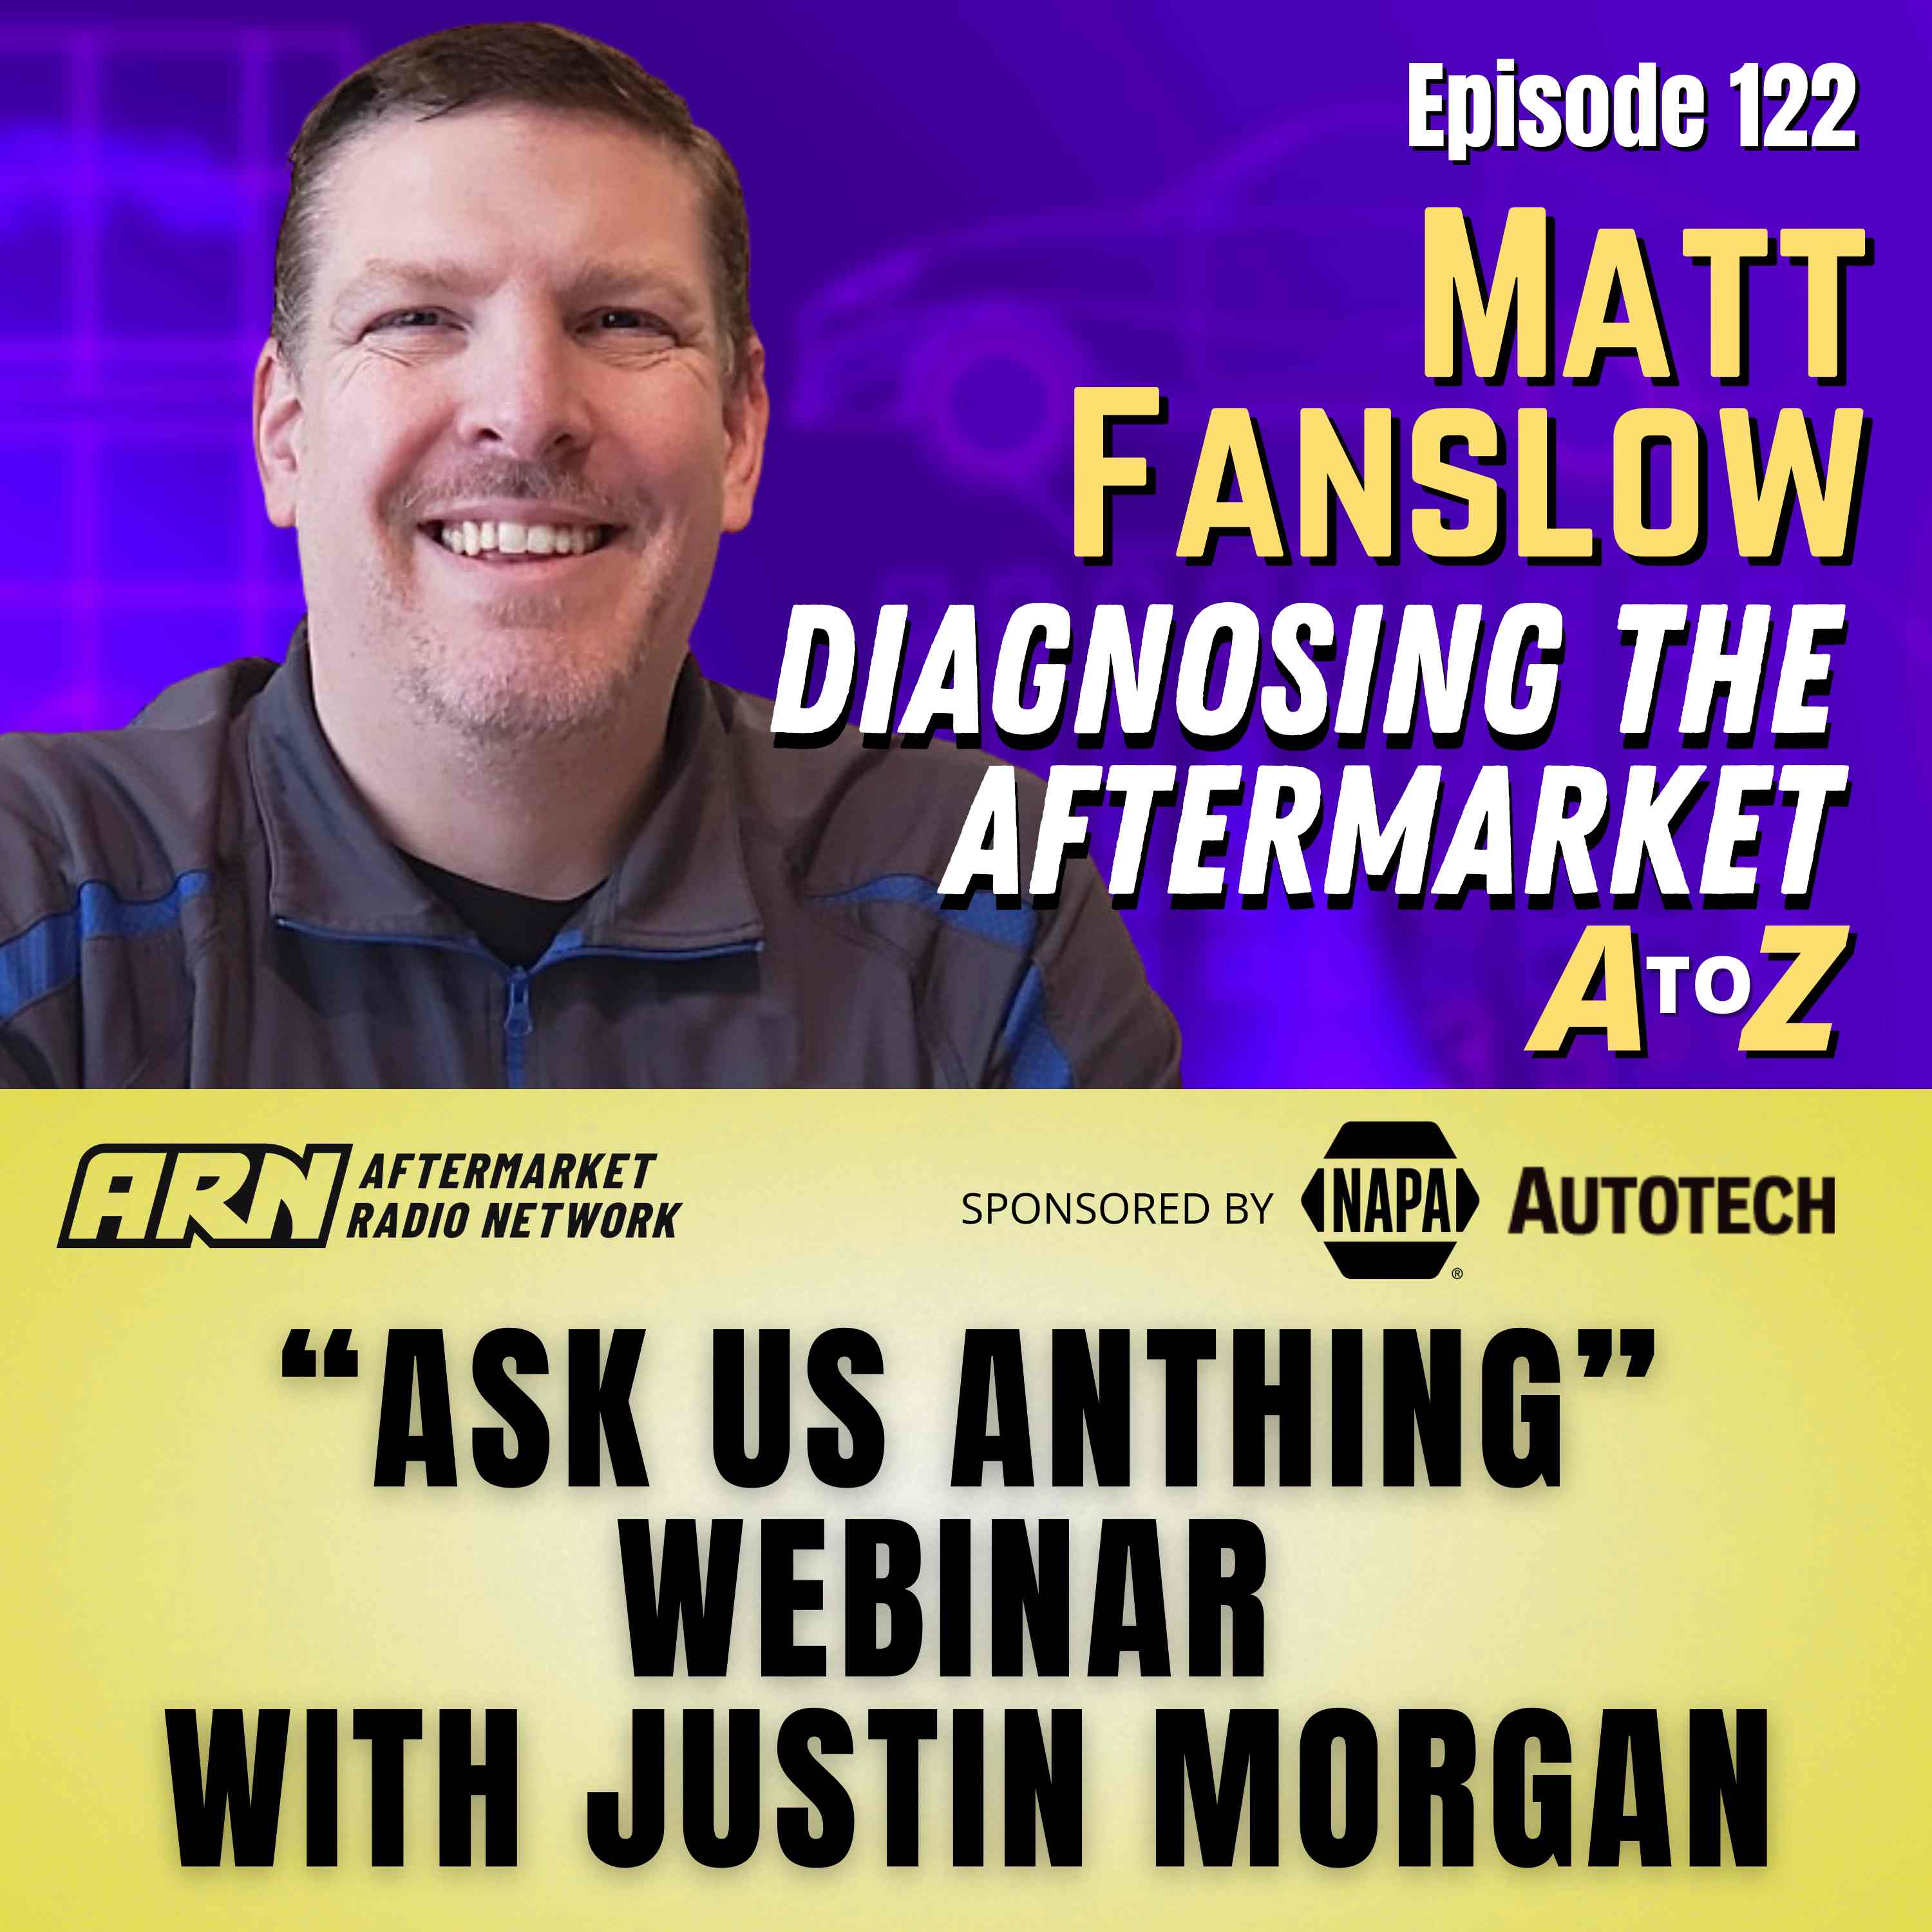 ”Ask Us Anything” Webinar with Justin Morgan [E122] - Diagnosing the Aftermarket A to Z